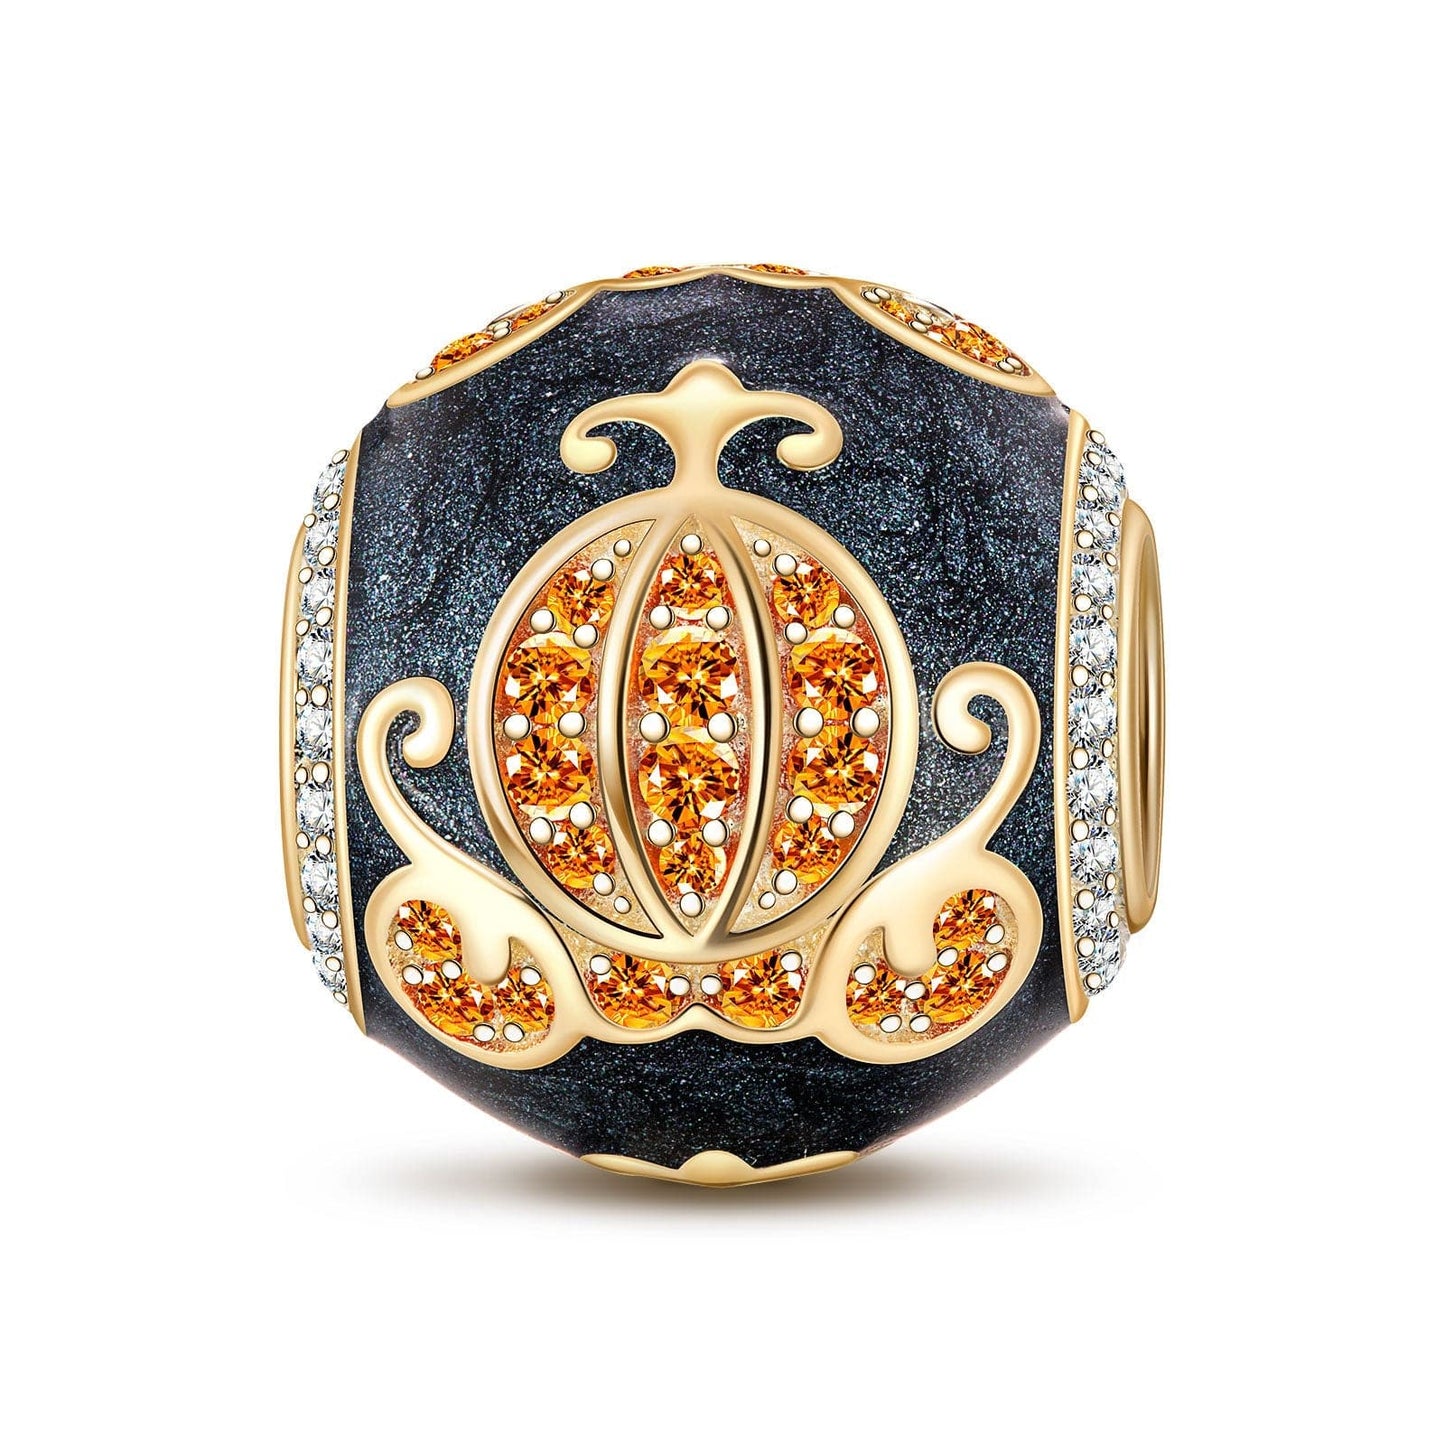 Pumpkin Carriage Tarnish-resistant Silver Charms With Enamel In 14K Gold Plated